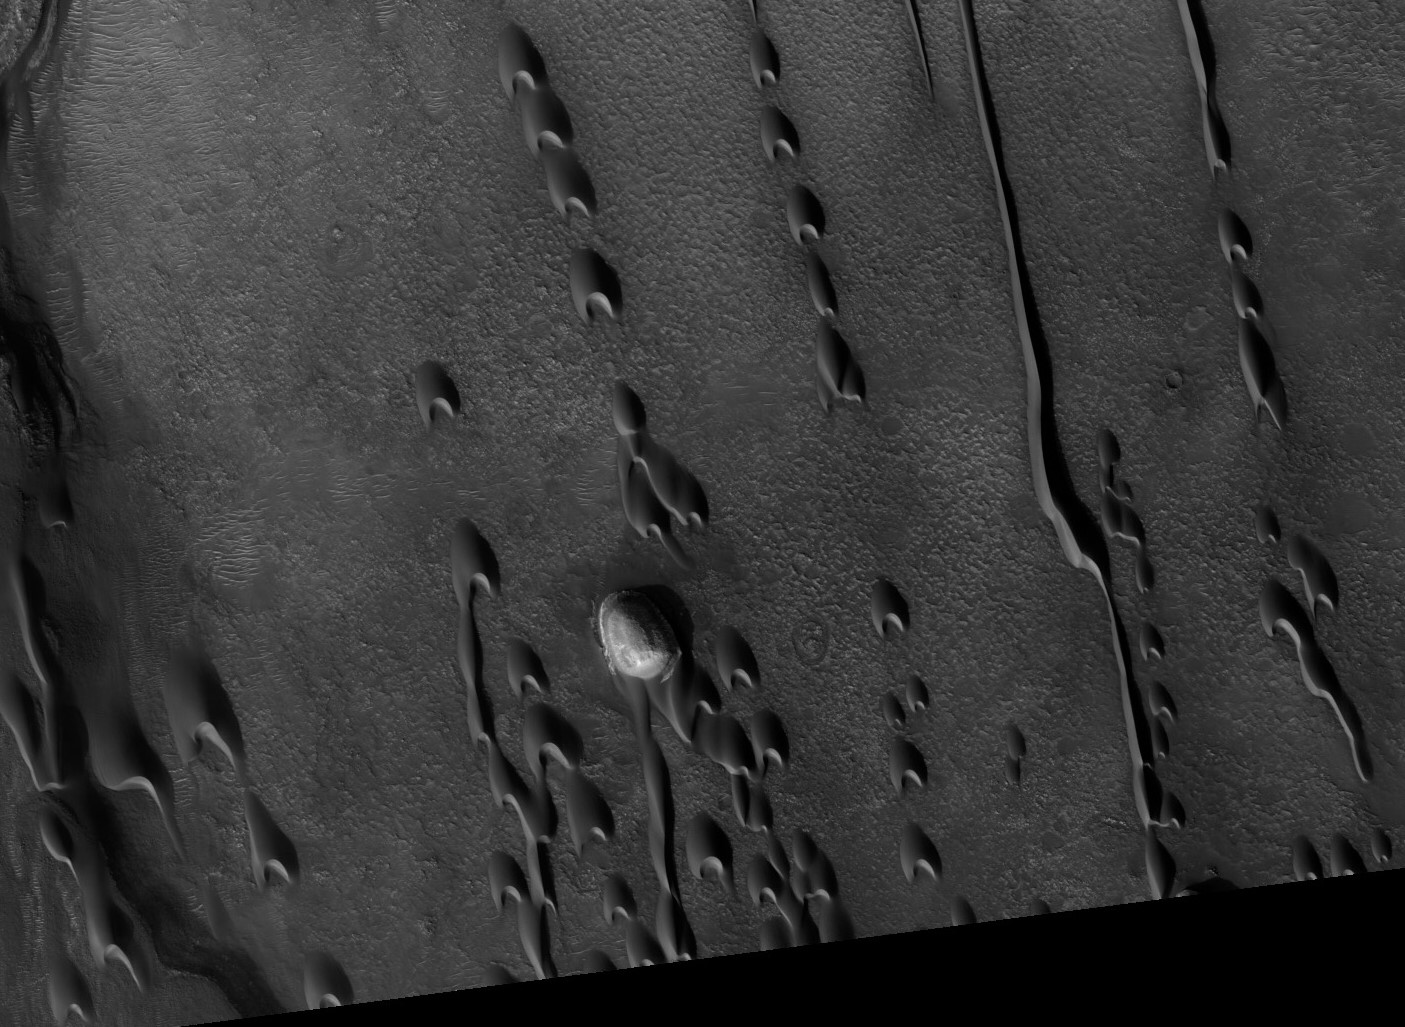 Barchan dunes march across a plain in the Hellespontus region west of Hellas basin on Mars. The orientation of their horns indicates consistent winds out of the east, blowing right to left in this image captured by the Mars Reconnaissance Orbiter. Sunshine lights the steep slopes of the leeward, or downwind, faces, on the dunes’ left sides. The dunes migrate with the wind, sometimes merging or extending long fingers that spawn new dunes. Credit: NASA/JPL/University of Arizona